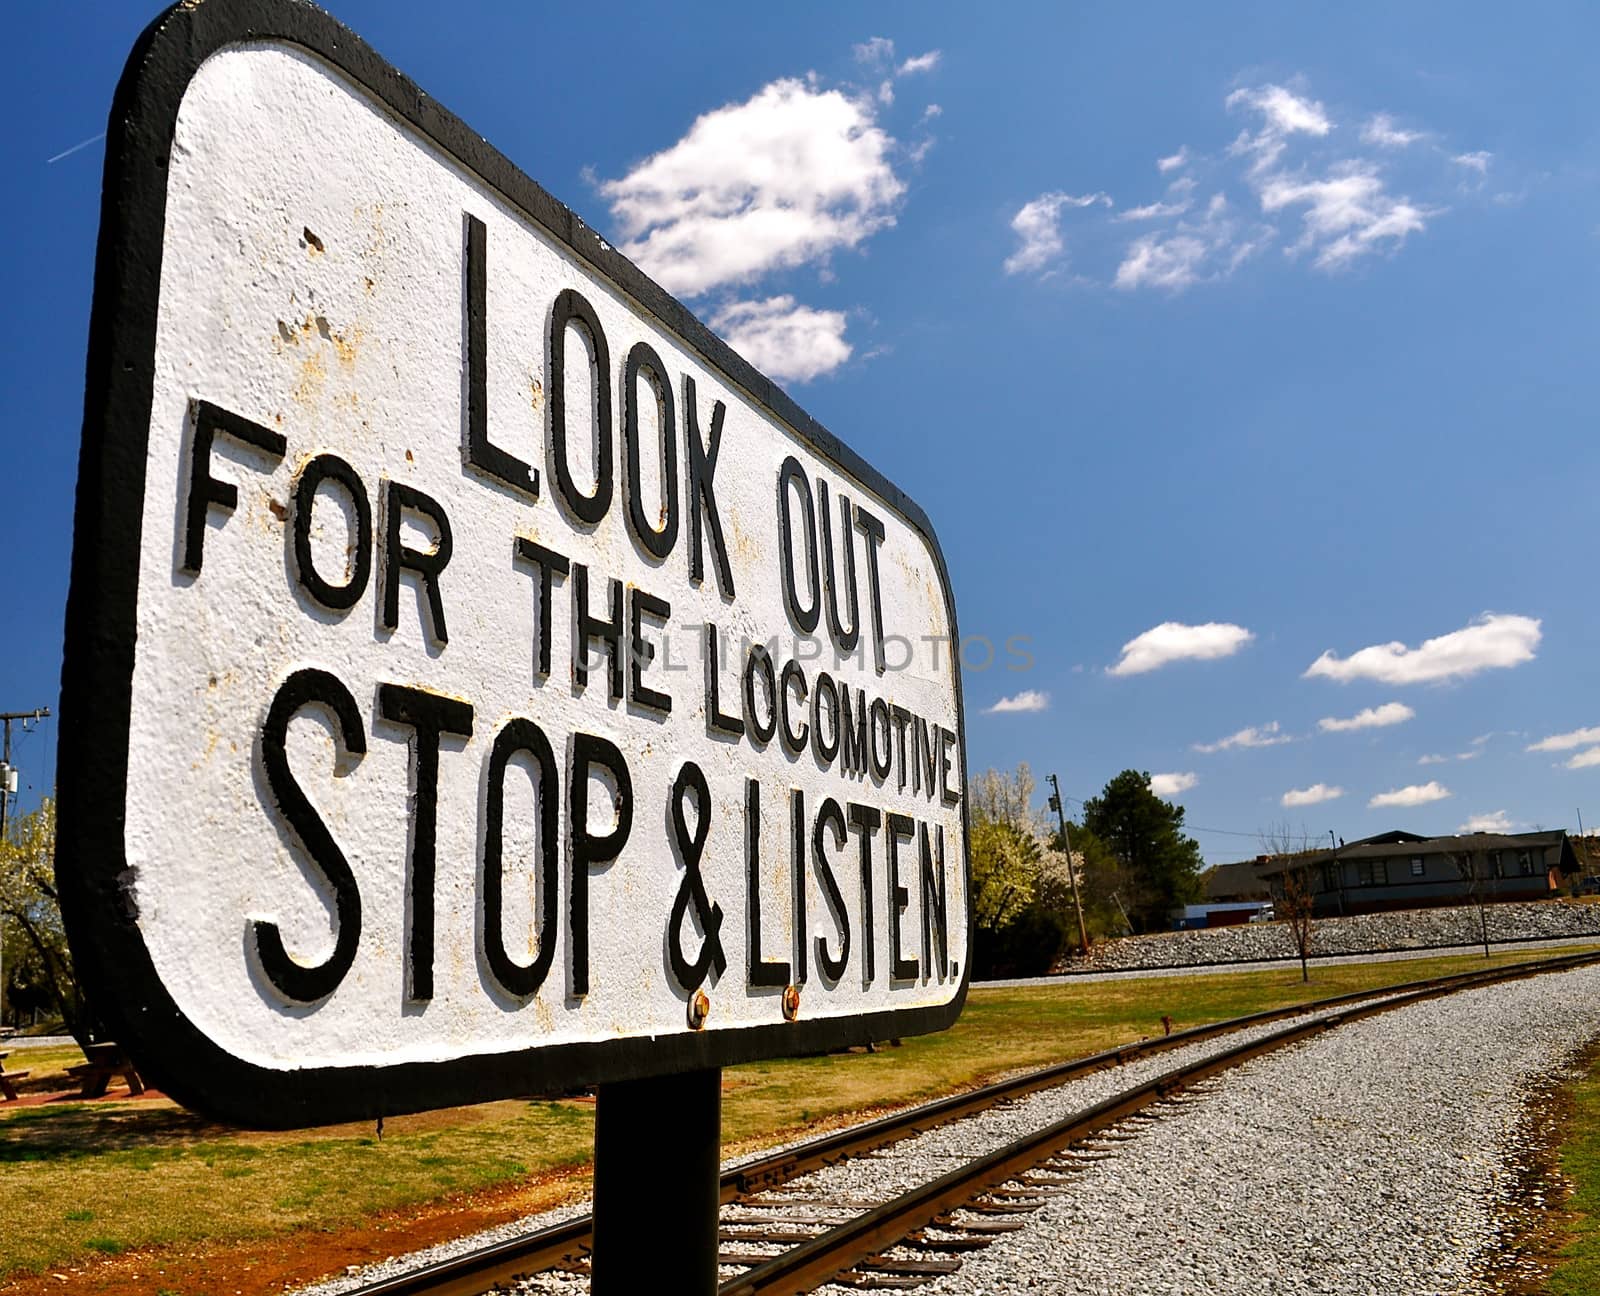 Look out for the Locomotive Sign